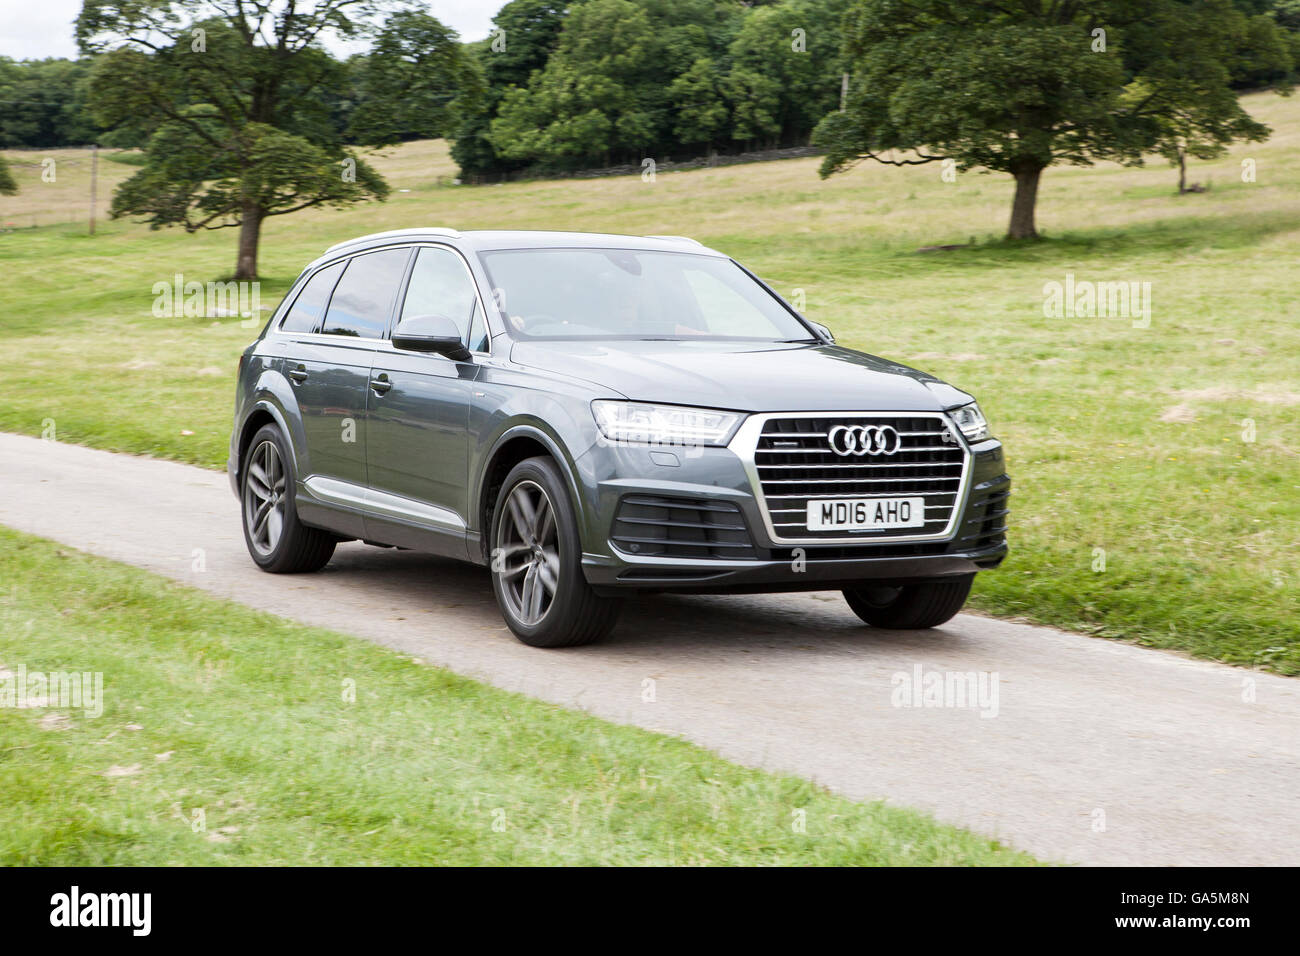 Audi Q7 at Leighton Hall Classic Car Rally, Carnforth, Lancashire, UK.  3rd July, 2016.  The annual classic car rally takes place at the magnificent Leighton Hall in Carnforth in Lancashire.  British classic sports cars ranging from MG's to American muscle cars like the Dodge Vipers & Ford Mustangs.  The spectator event drew thousands of visitors to this scenic part of the country on the north west coast of England.  Credit:  Cernan Elias/Alamy Live News Stock Photo